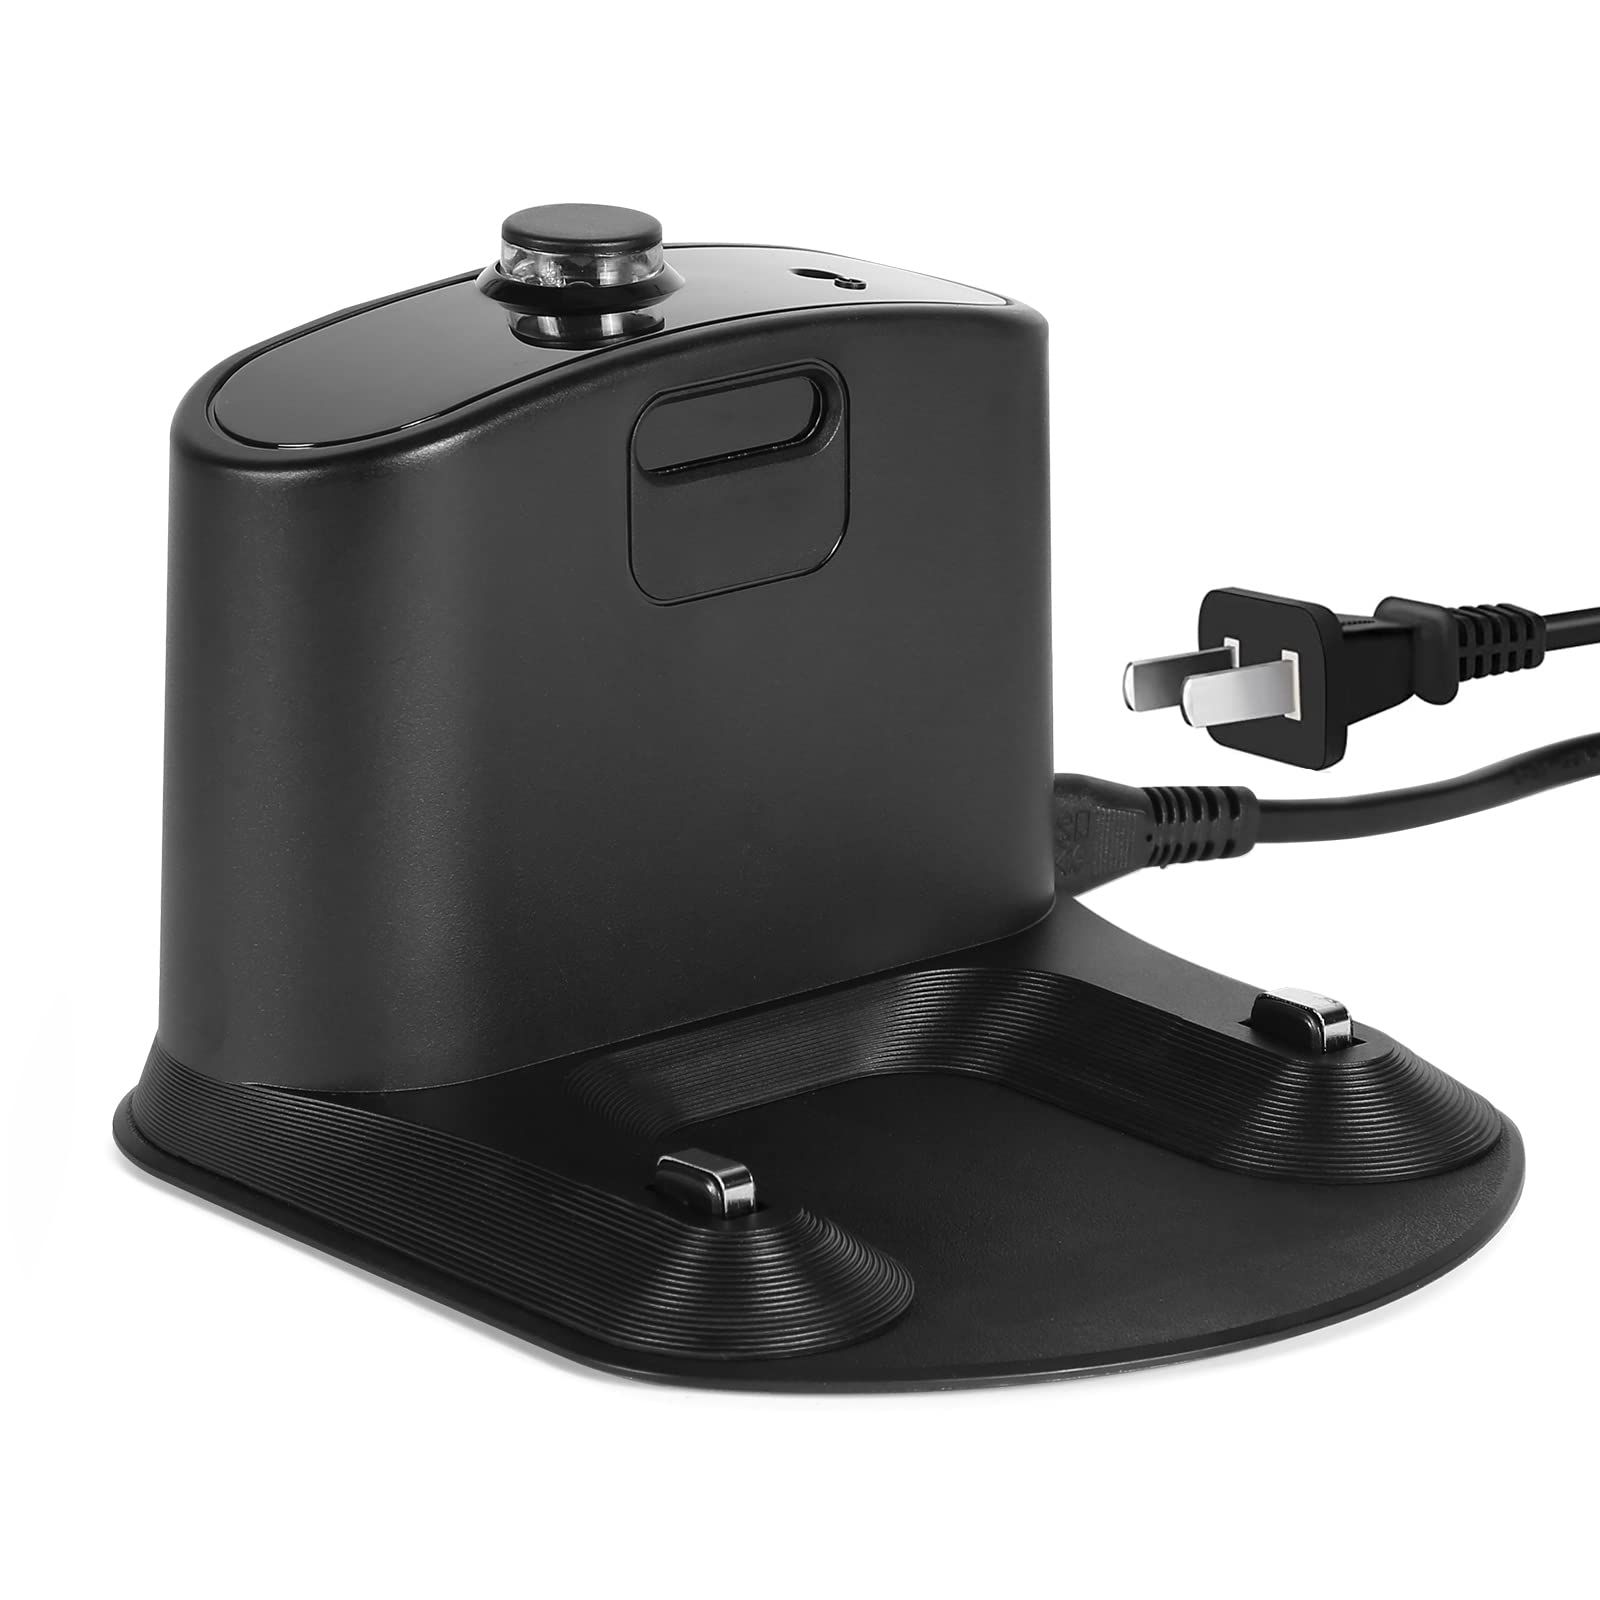 Roomba Charger Dock, Roomba Charging Base, Replacement Roomba Docking Station for Roomba e5 e6 i1 i3 i4 i6 i7 i8 500 600 700 800 900 Series -Charger ADF-N1 17170 17064, 4452369